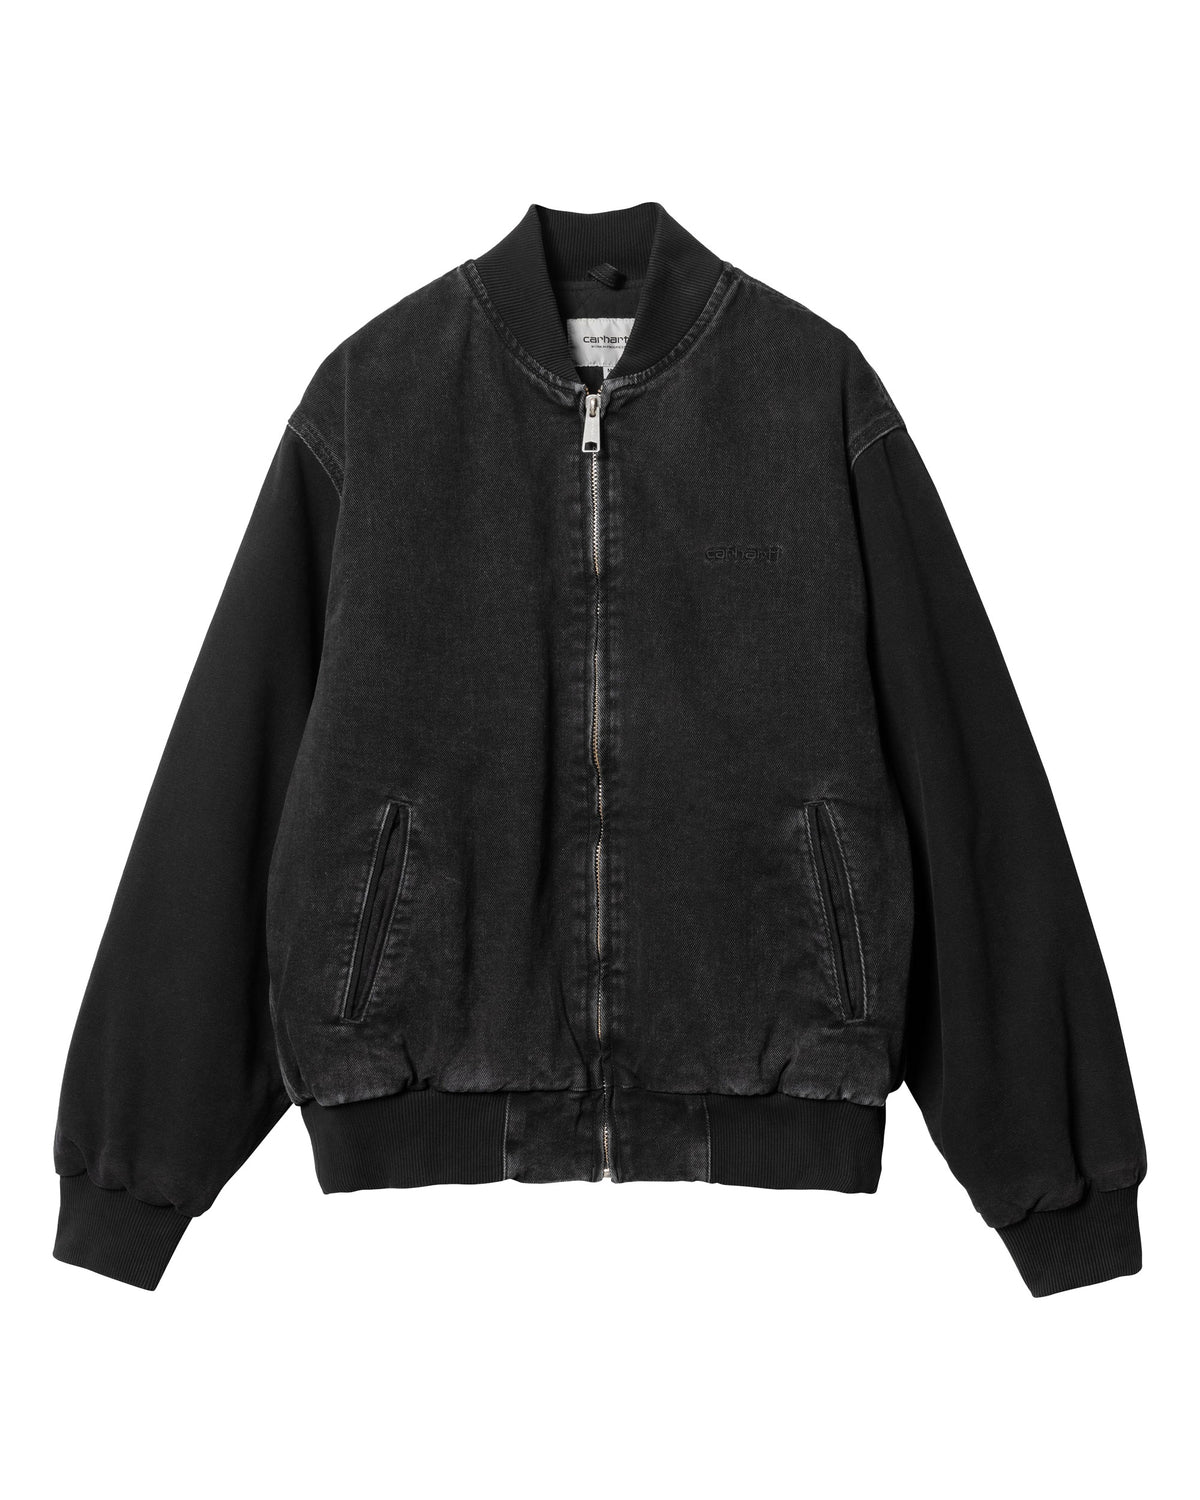 Carhartt Wip Paxon Bomber Black Stone Washed